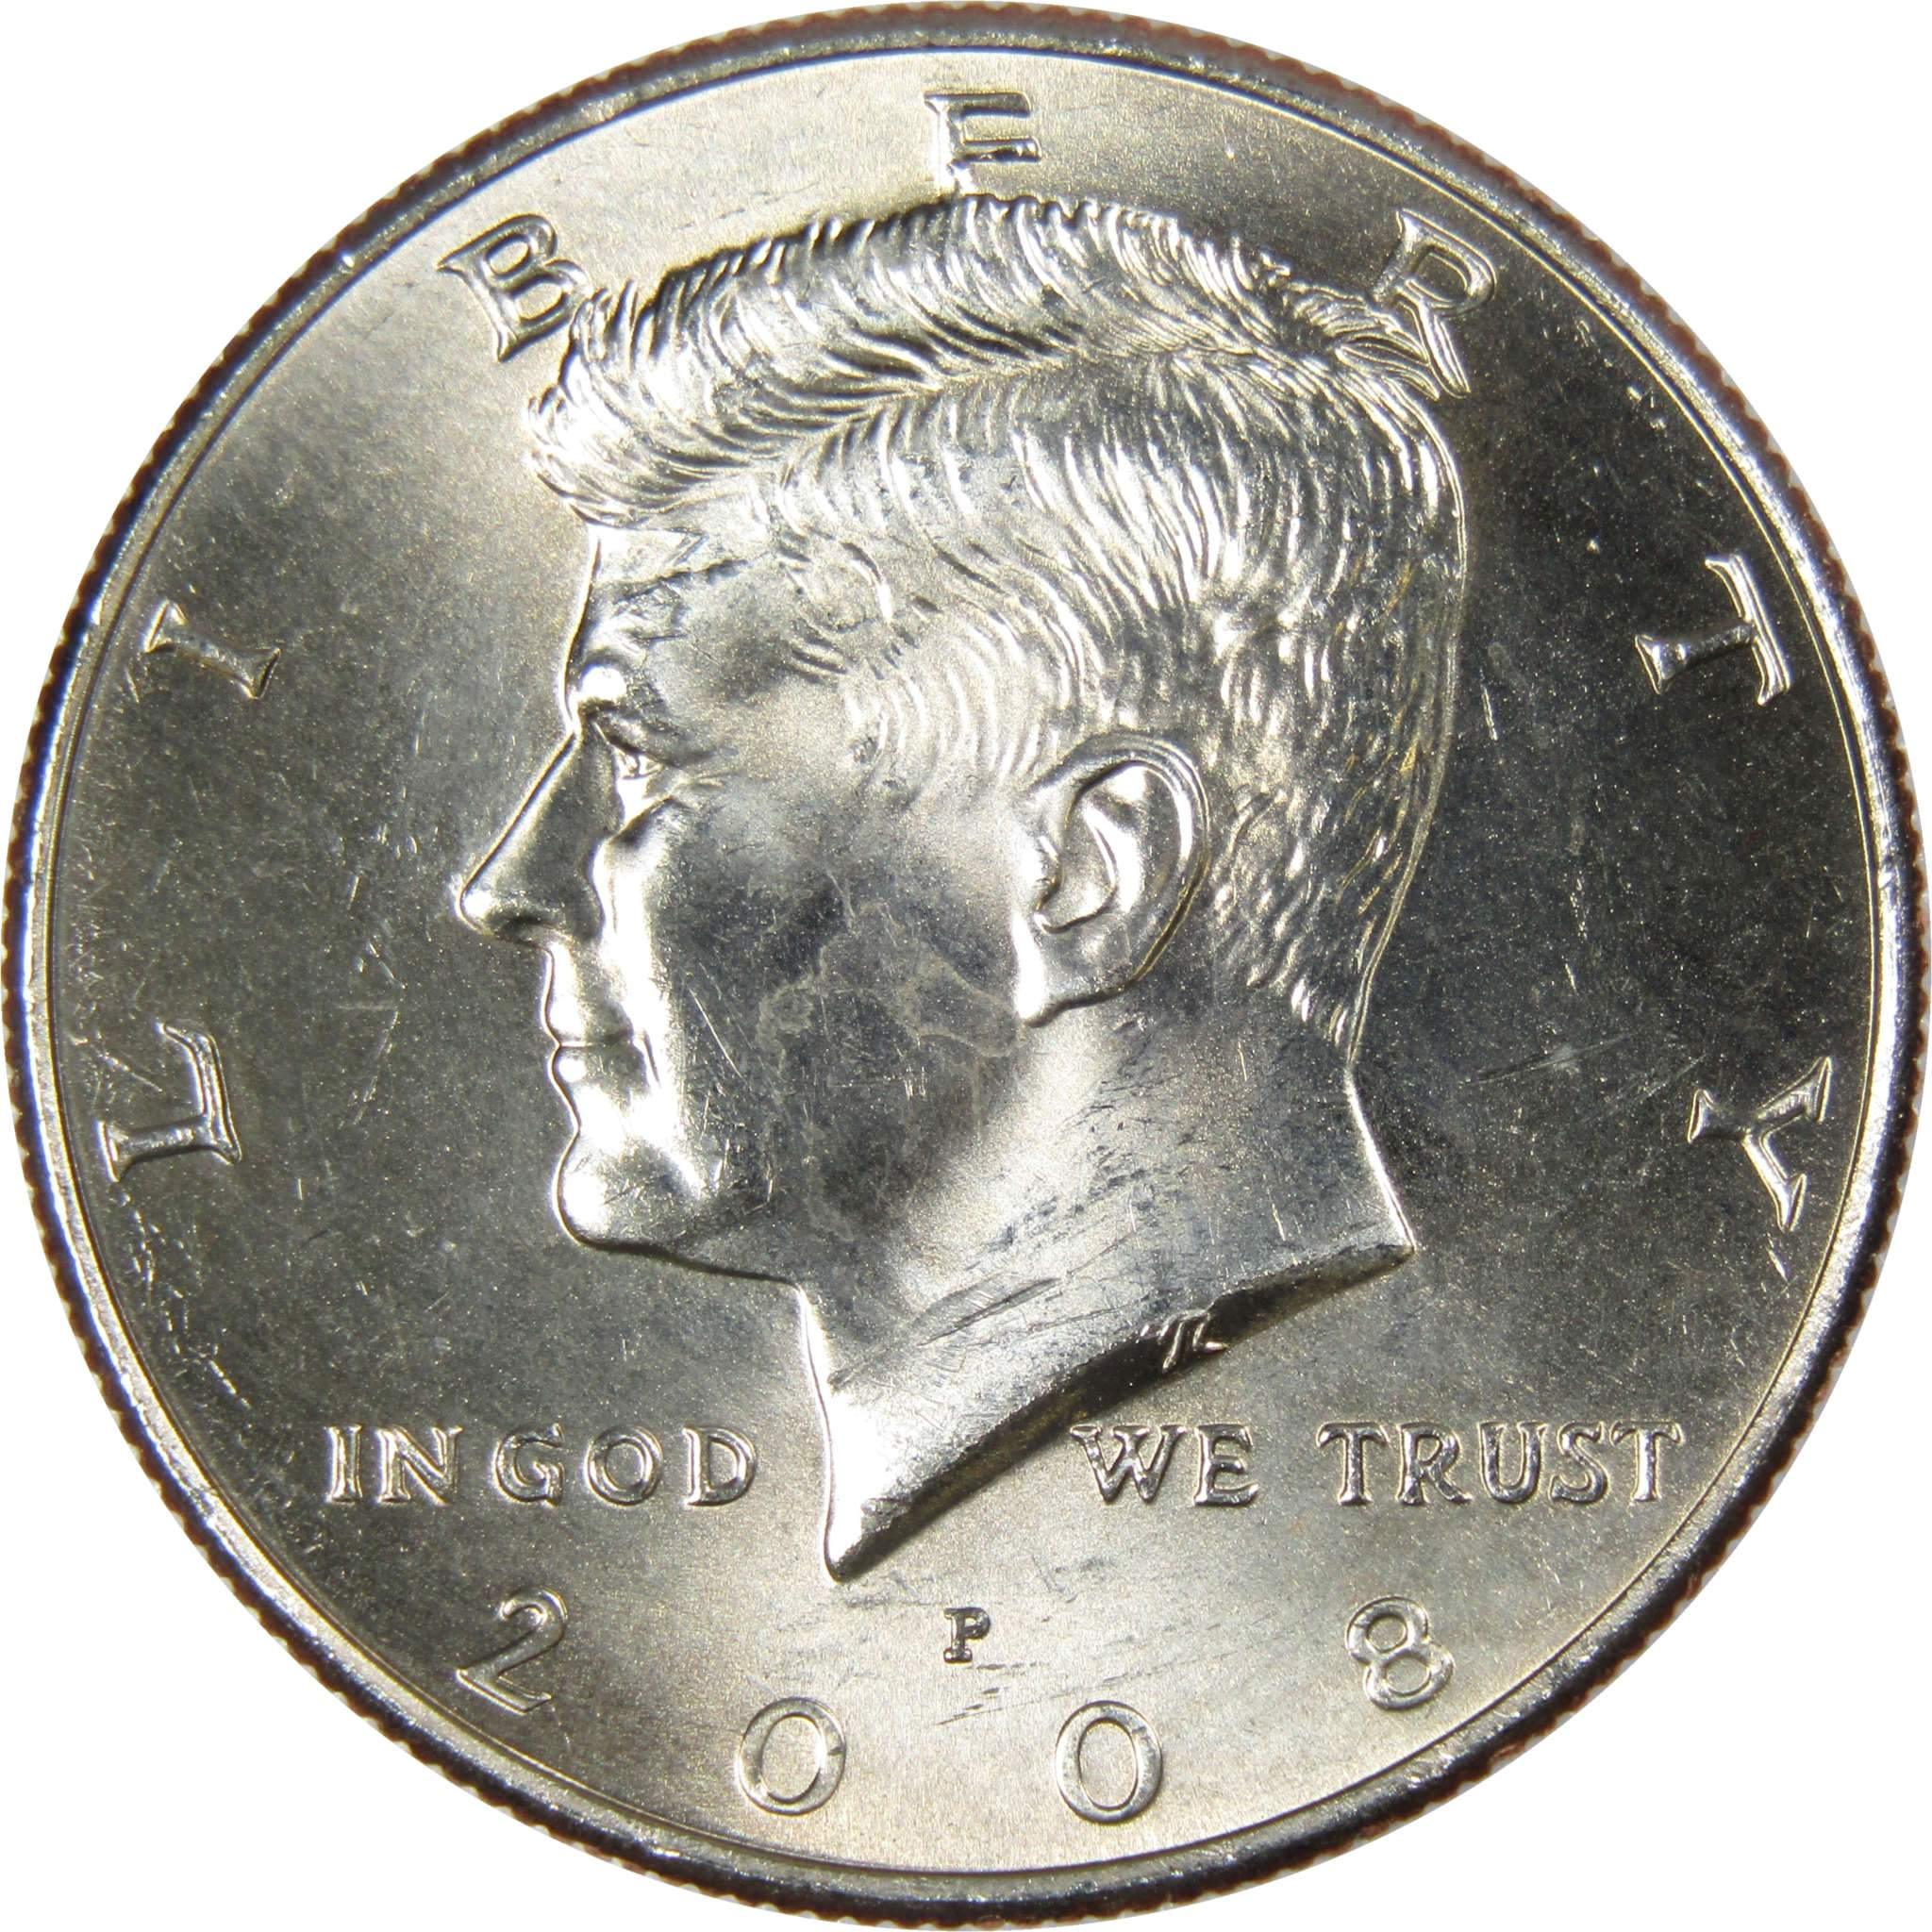 2008 P Kennedy Half Dollar BU Uncirculated Mint State 50c US Coin Collectible